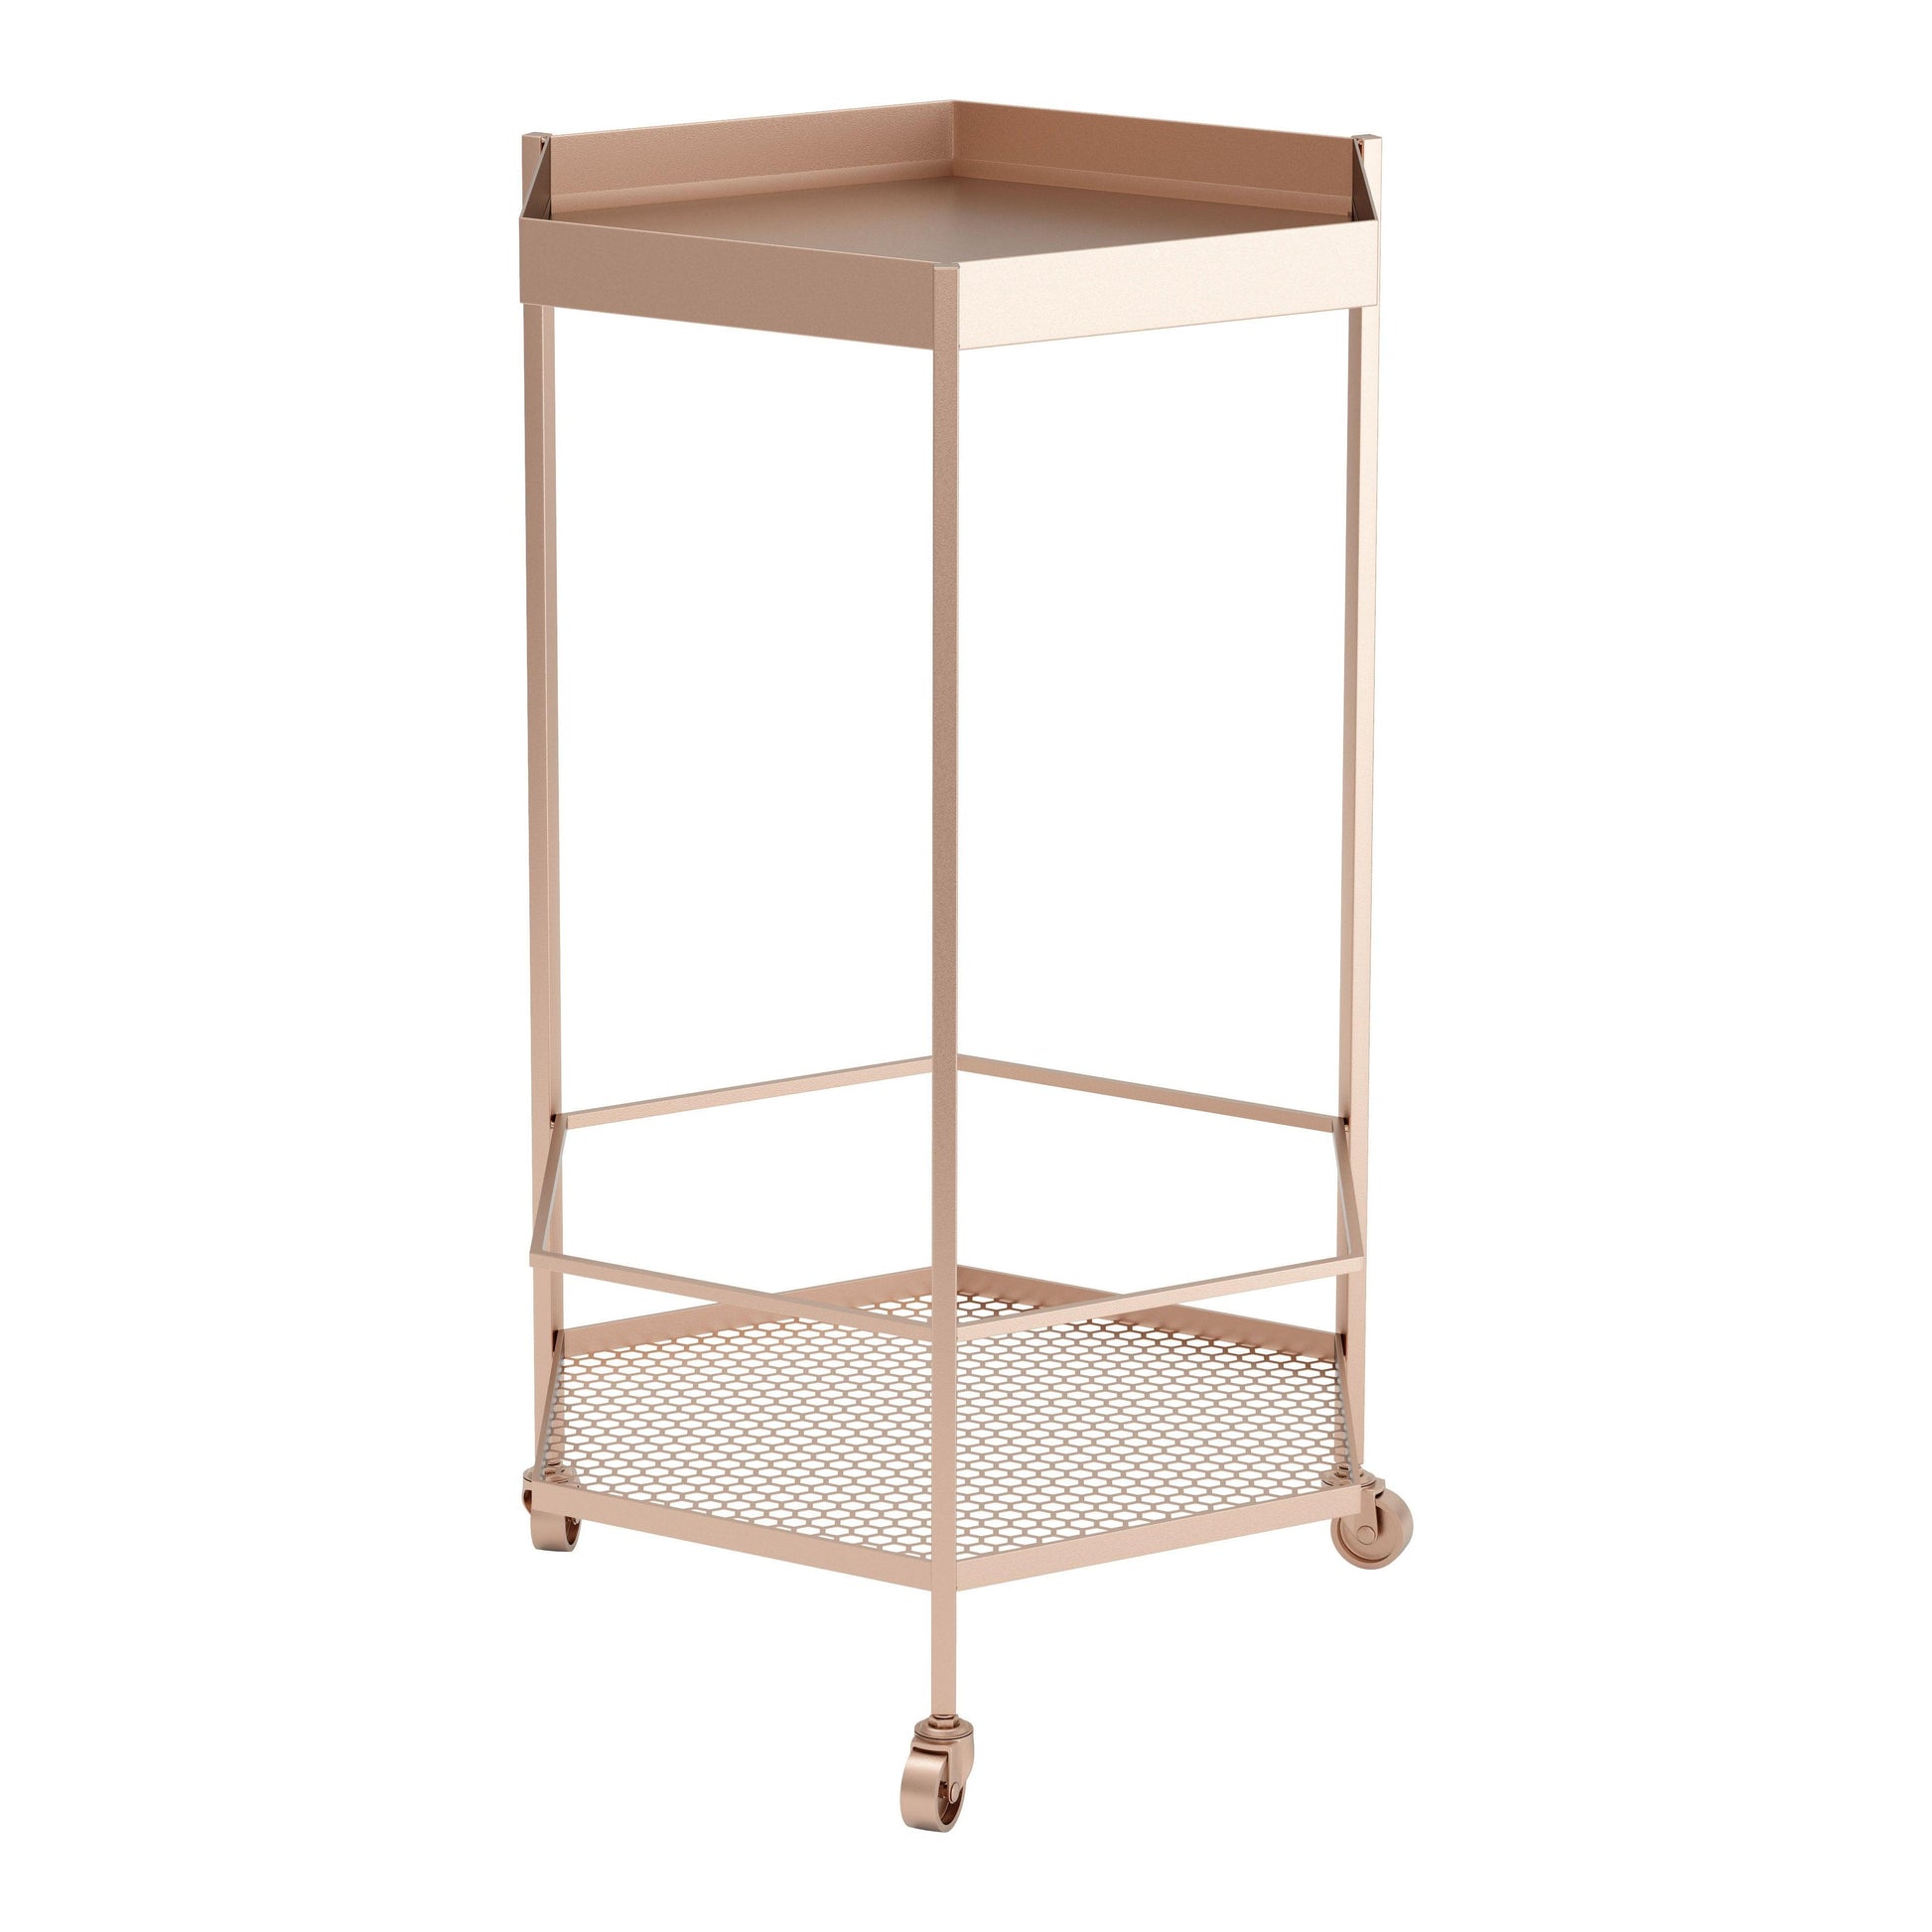 Hex Bar Cart Gold - Sideboards and Things Accents_Gold, Brand_Zuo Modern, Color_Gold, Depth_10-20, Features_With Wheels, Finish_Hand Painted, Height_20-30, Materials_Metal, Metal Type_Steel, Product Type_Bar Cart, Shape_Geometric, Shelf Material_Metal, Width_10-20